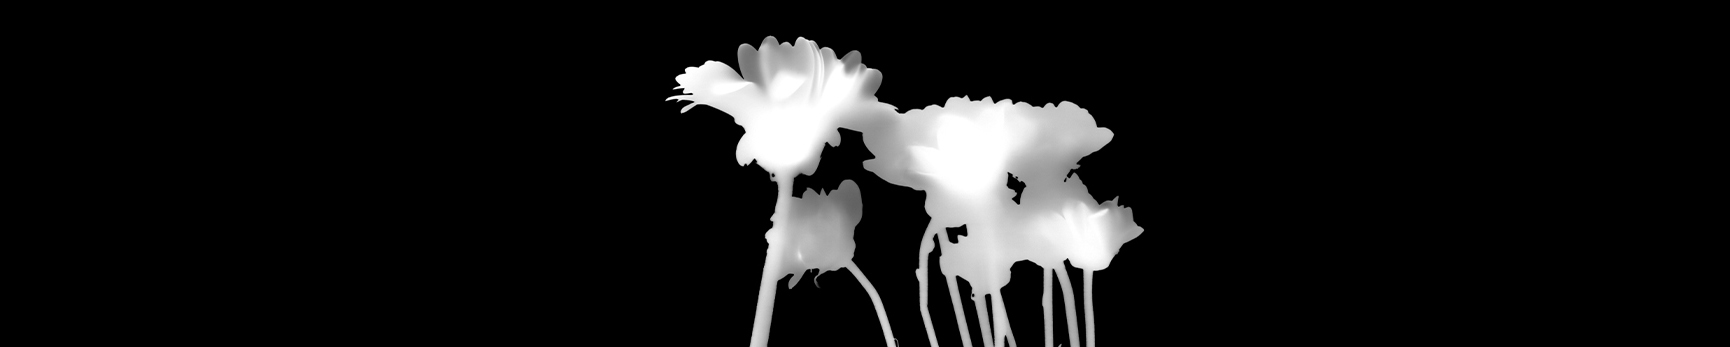 Black and white photogram, or shadow shape, of a small bunch of flowers